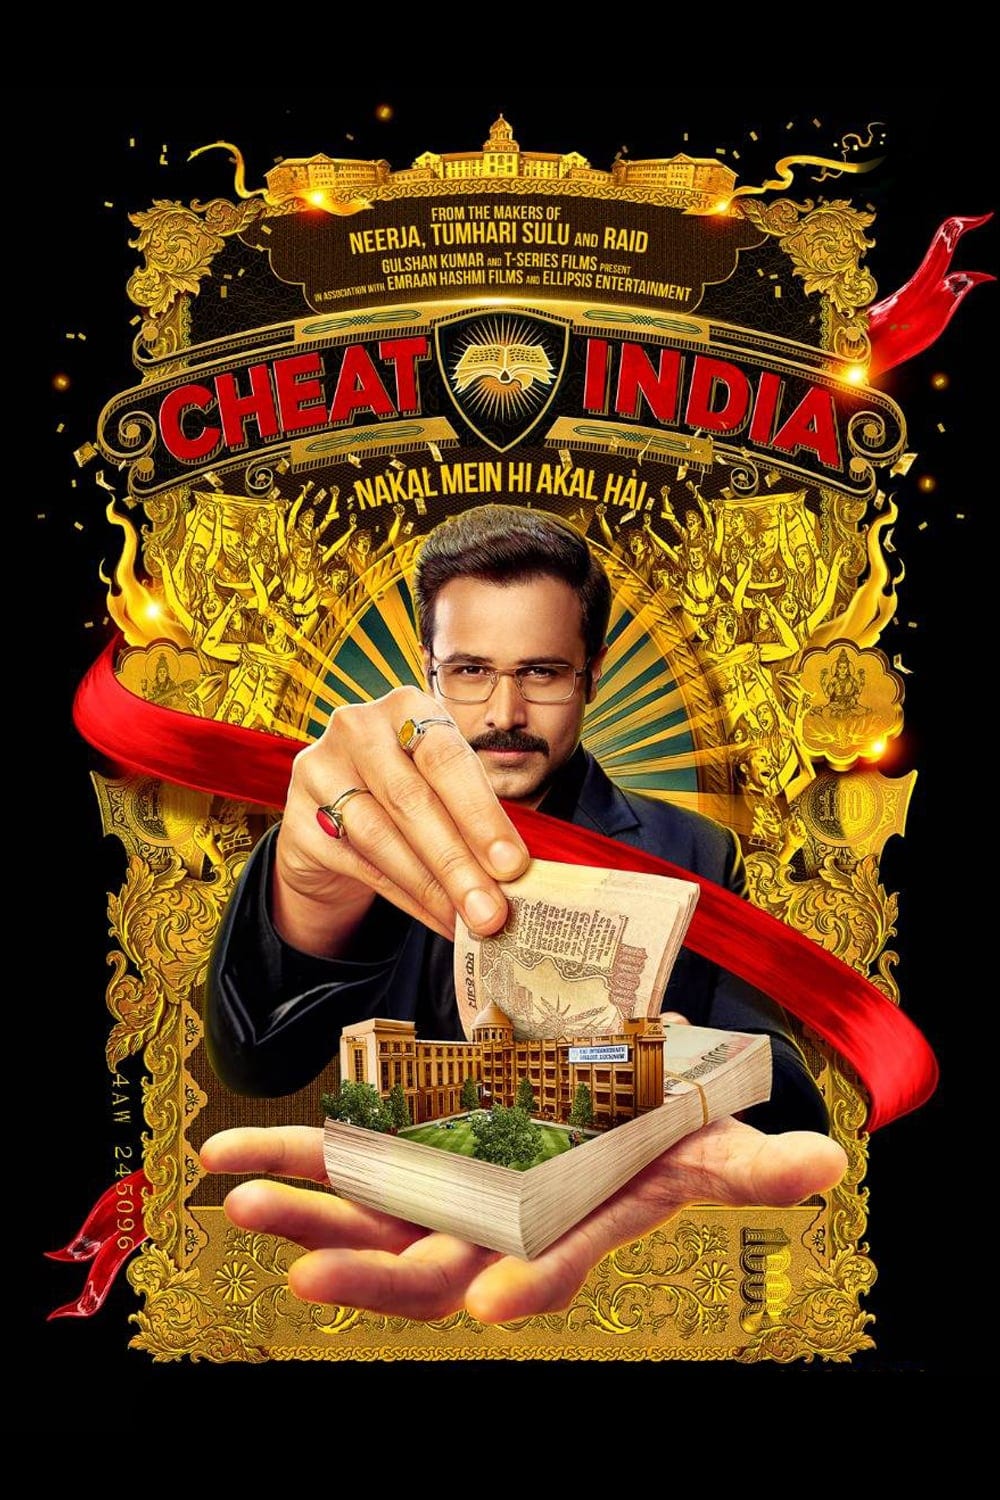 Poster for the movie "Why Cheat India"